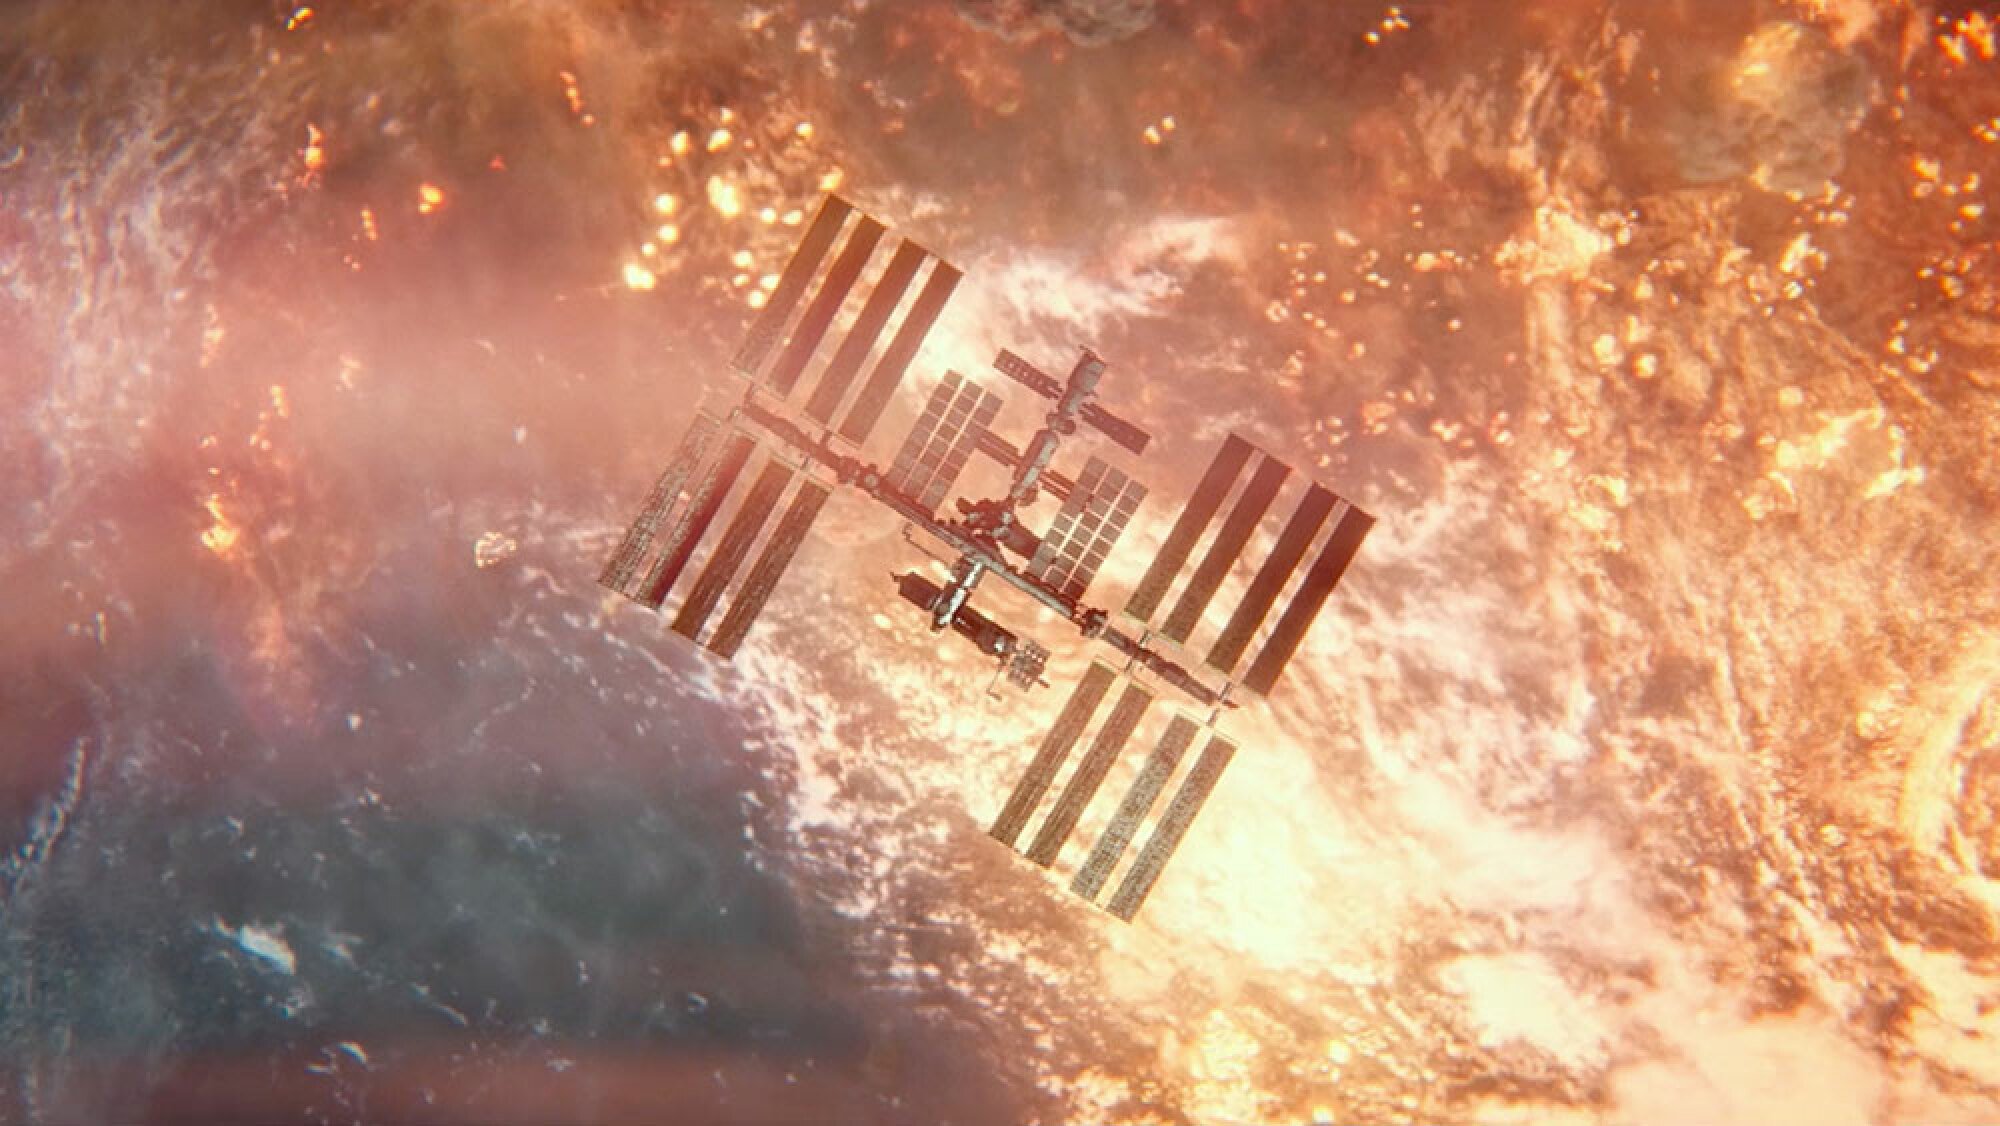 A space station is visible from above with Earth below it, covered in what looks like fire.